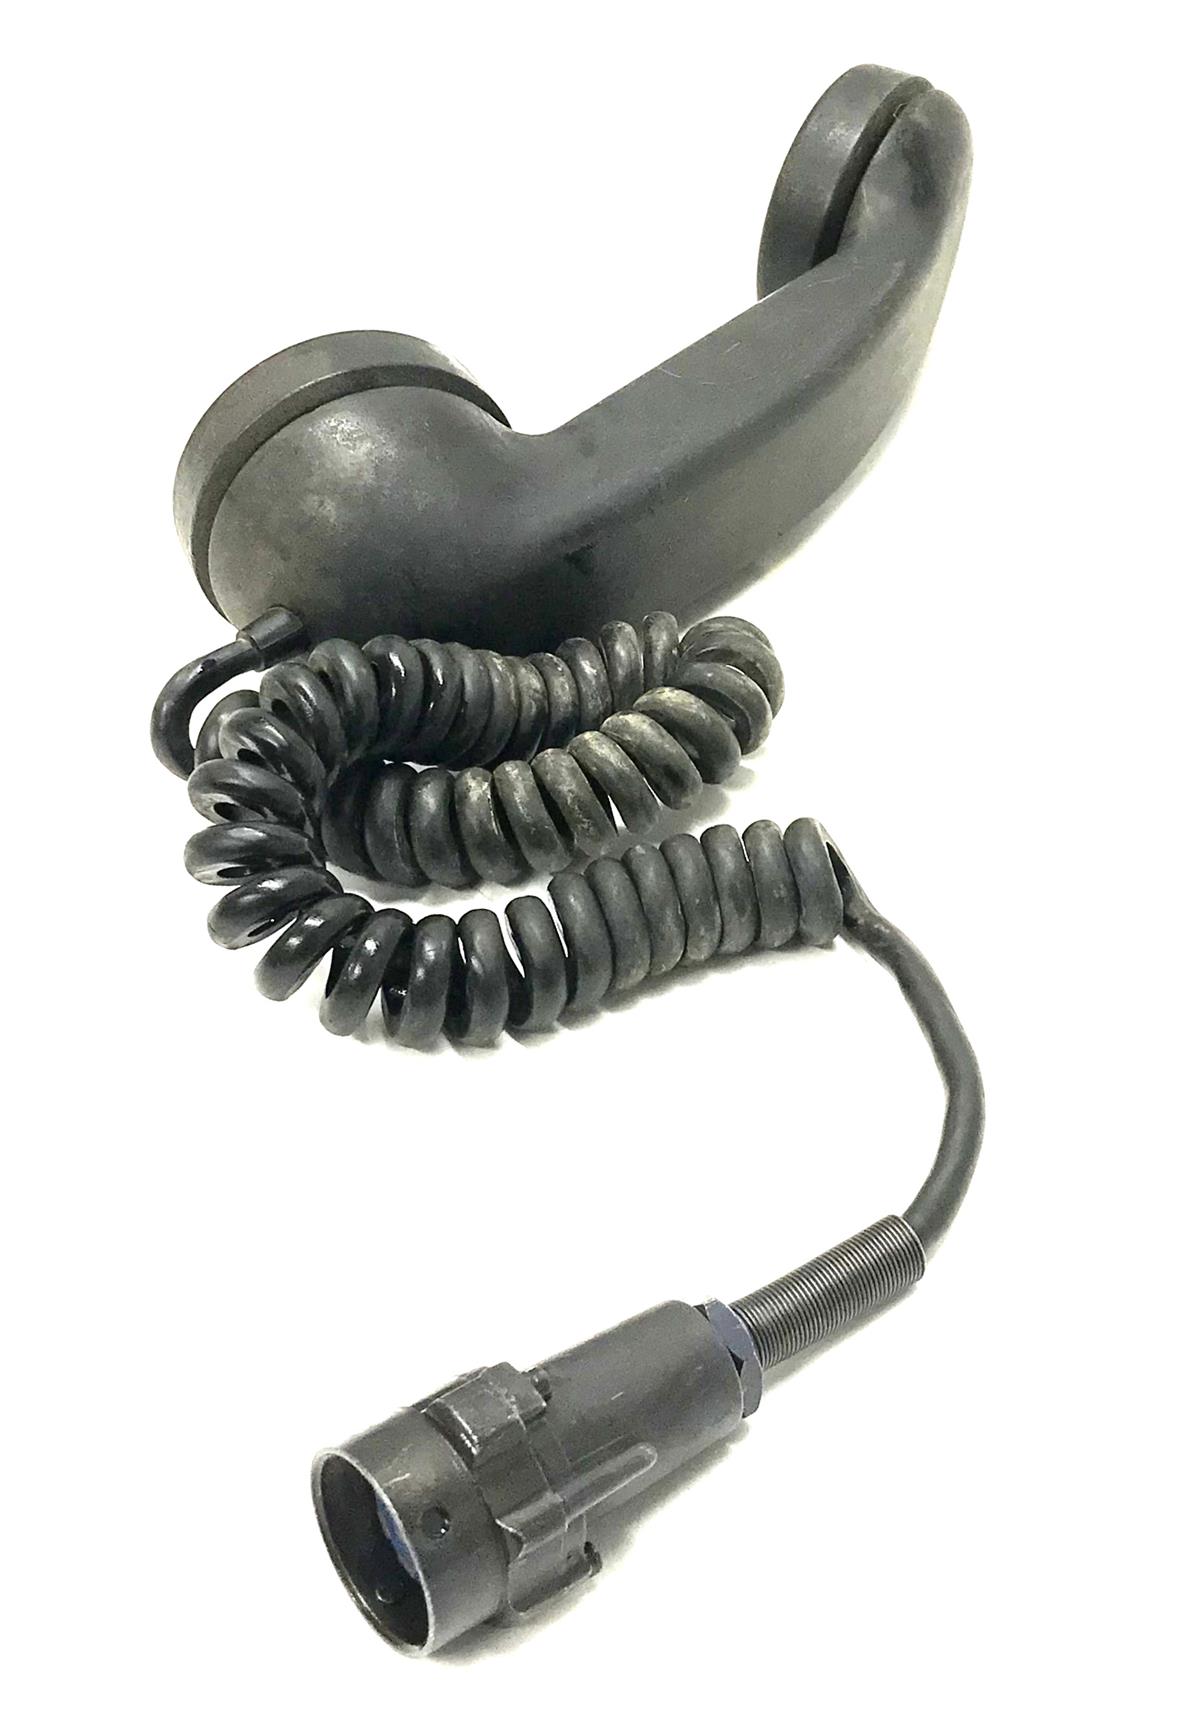 SP-2250 | SP-2250  ANGSA-6C Chest Set Group With Headset Microphone and Handset with U-77U Connector  (48).JPG